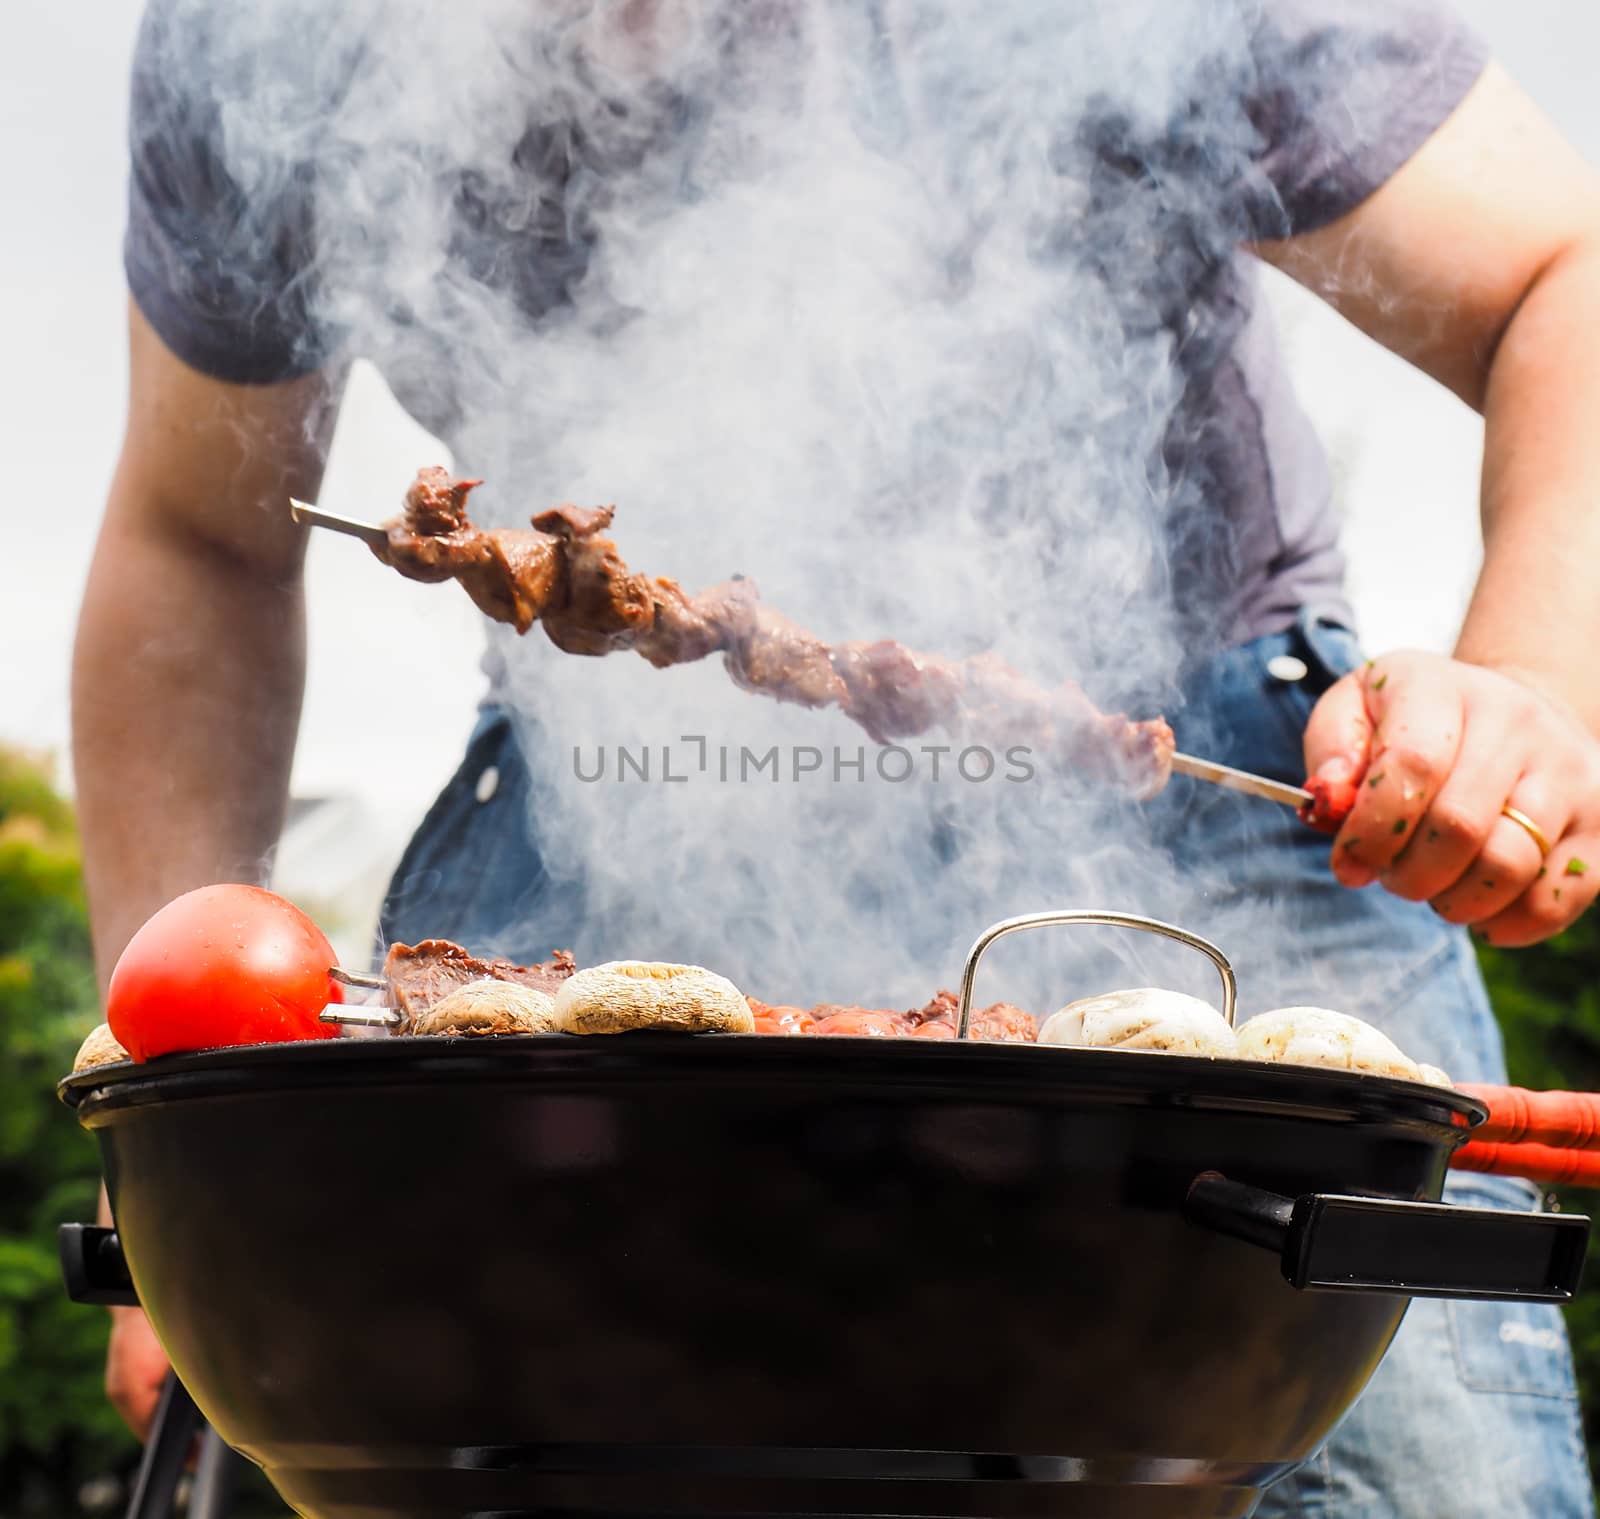 Chef covered in smoke grilling skewers of meat and vegetables ov by Arvebettum